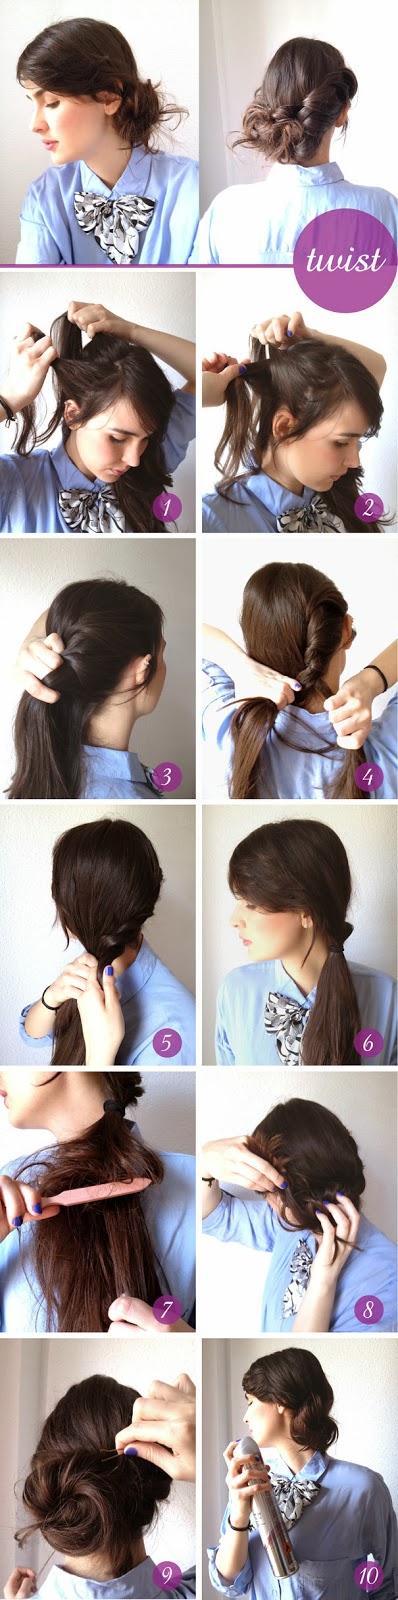 http://hairstyles-womens.blogspot.com/2014/01/the-messy-twist.html